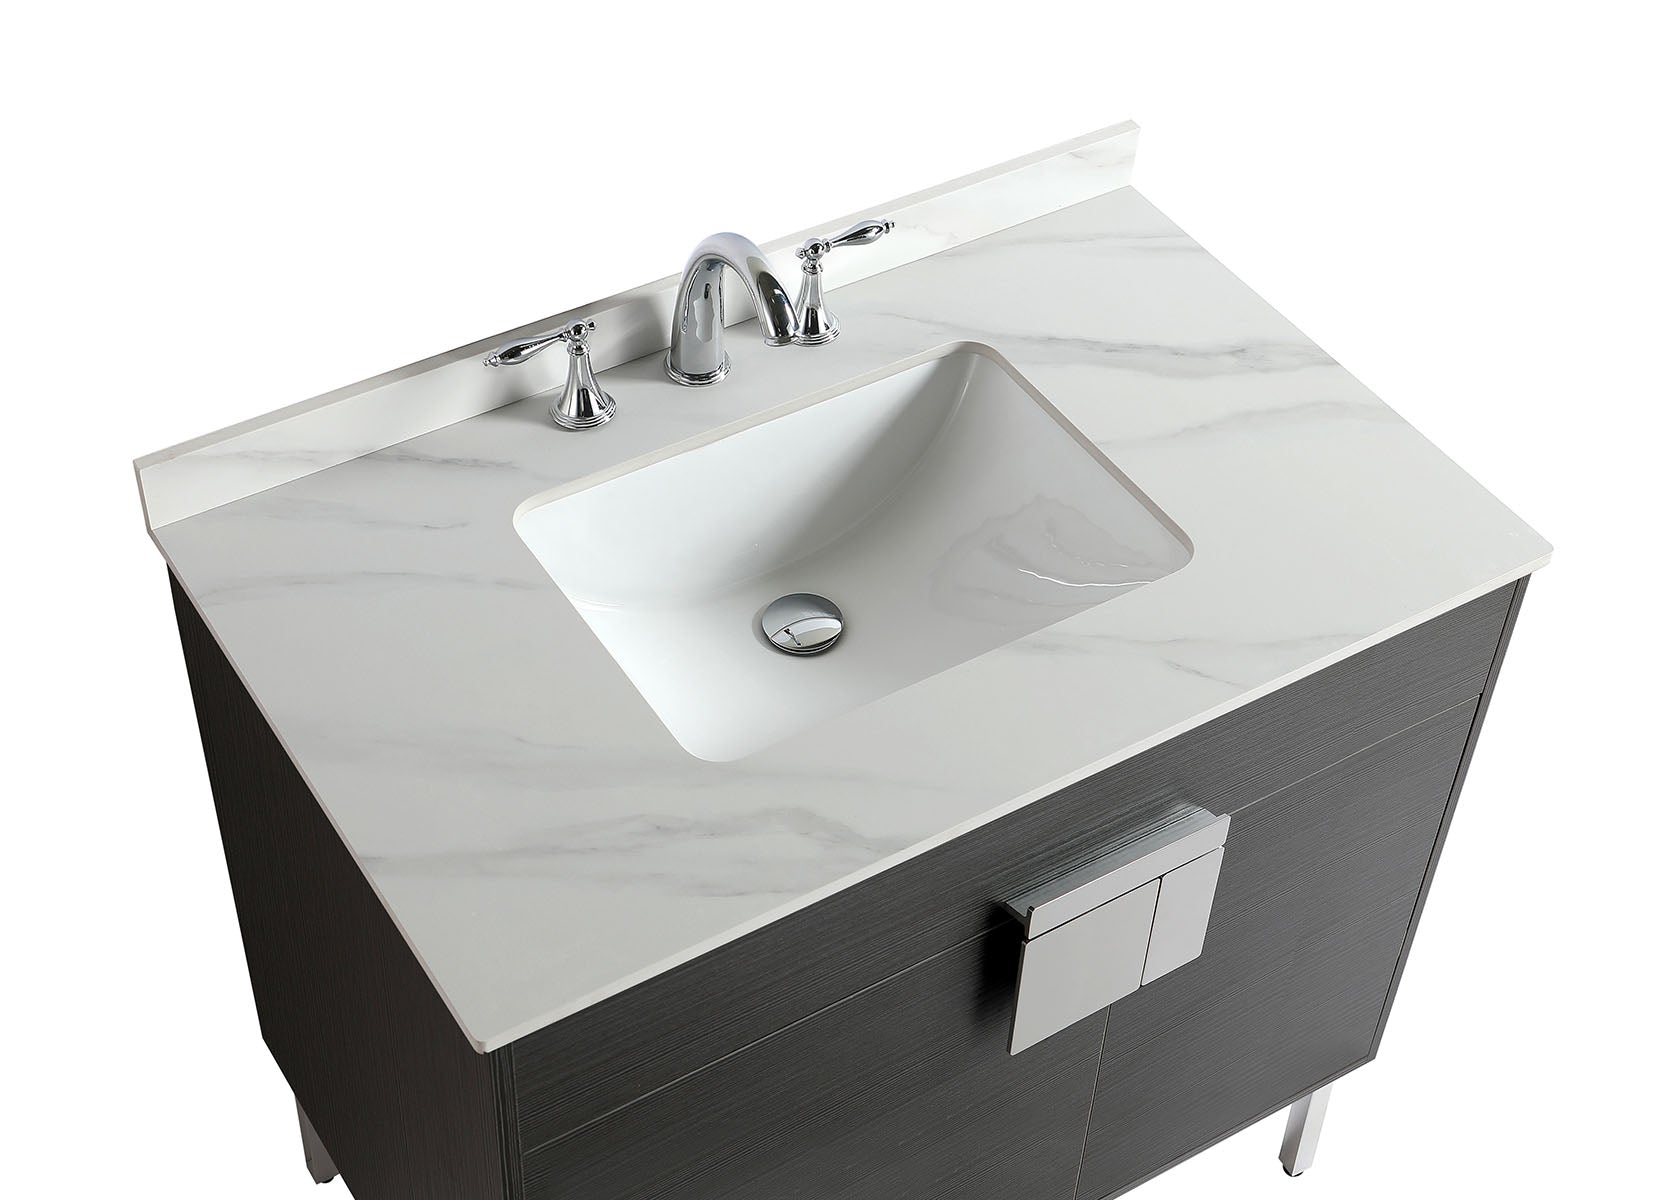 36" Vanity with Sintered Stone Countertop (Charcoal Grey) V9003 Series - iStyle Bath